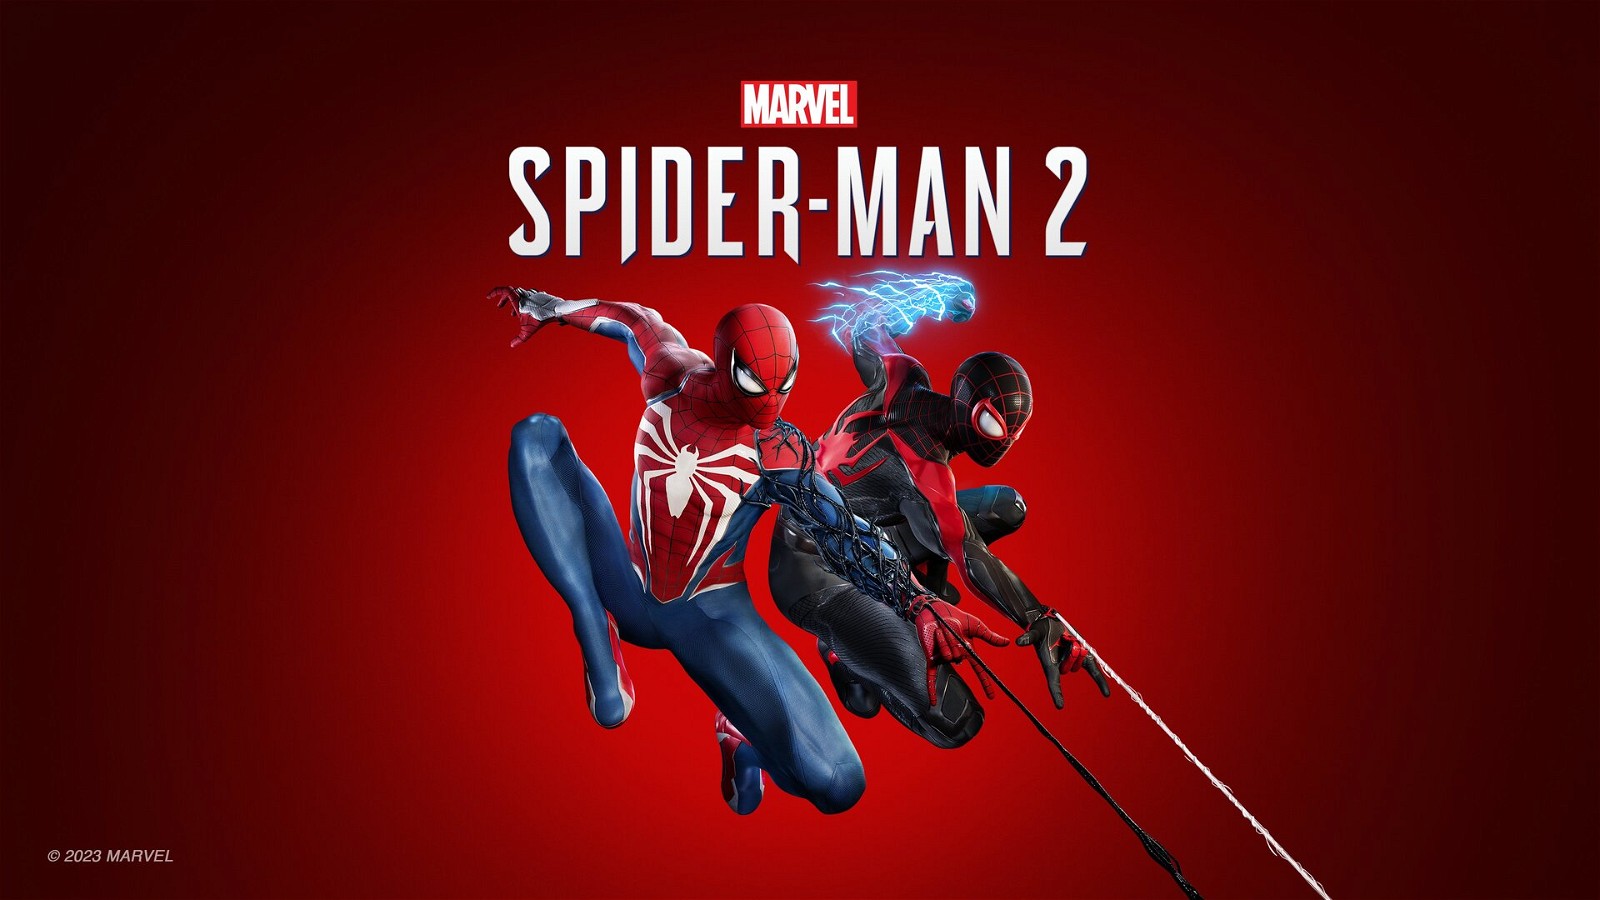 PS5 file sizes revealed for Spider-Man: Miles Morales and Demon's